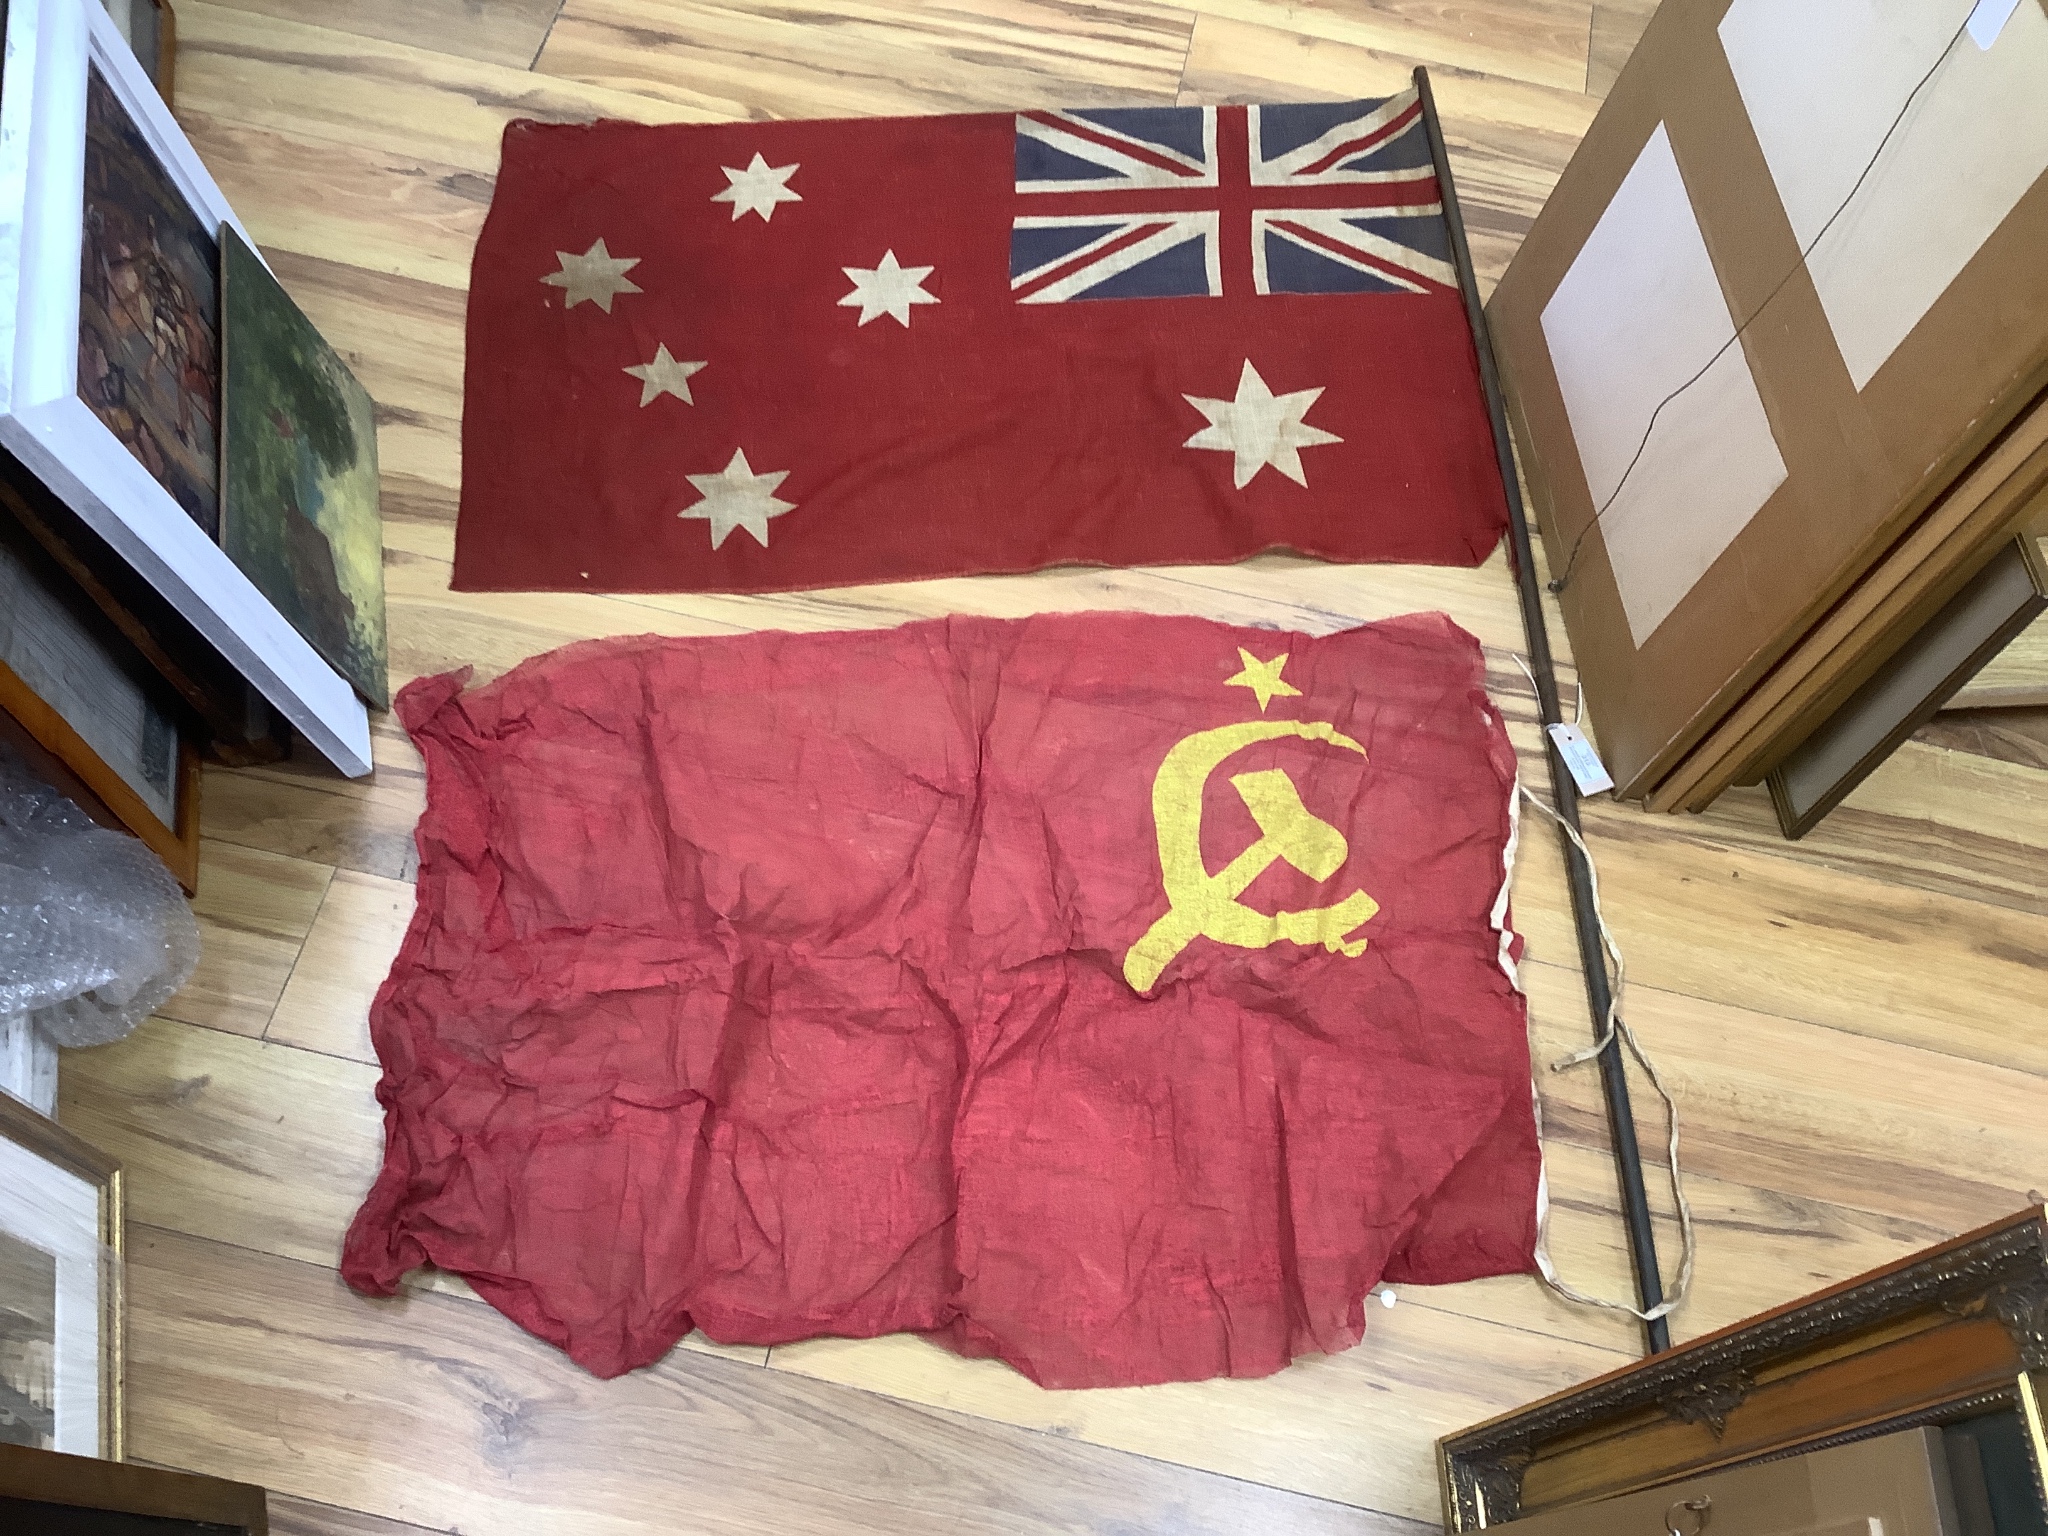 A large German Third Reich flag, 300 x 160cm, a Japan Rising Sun flag, 260cm, and other national flags